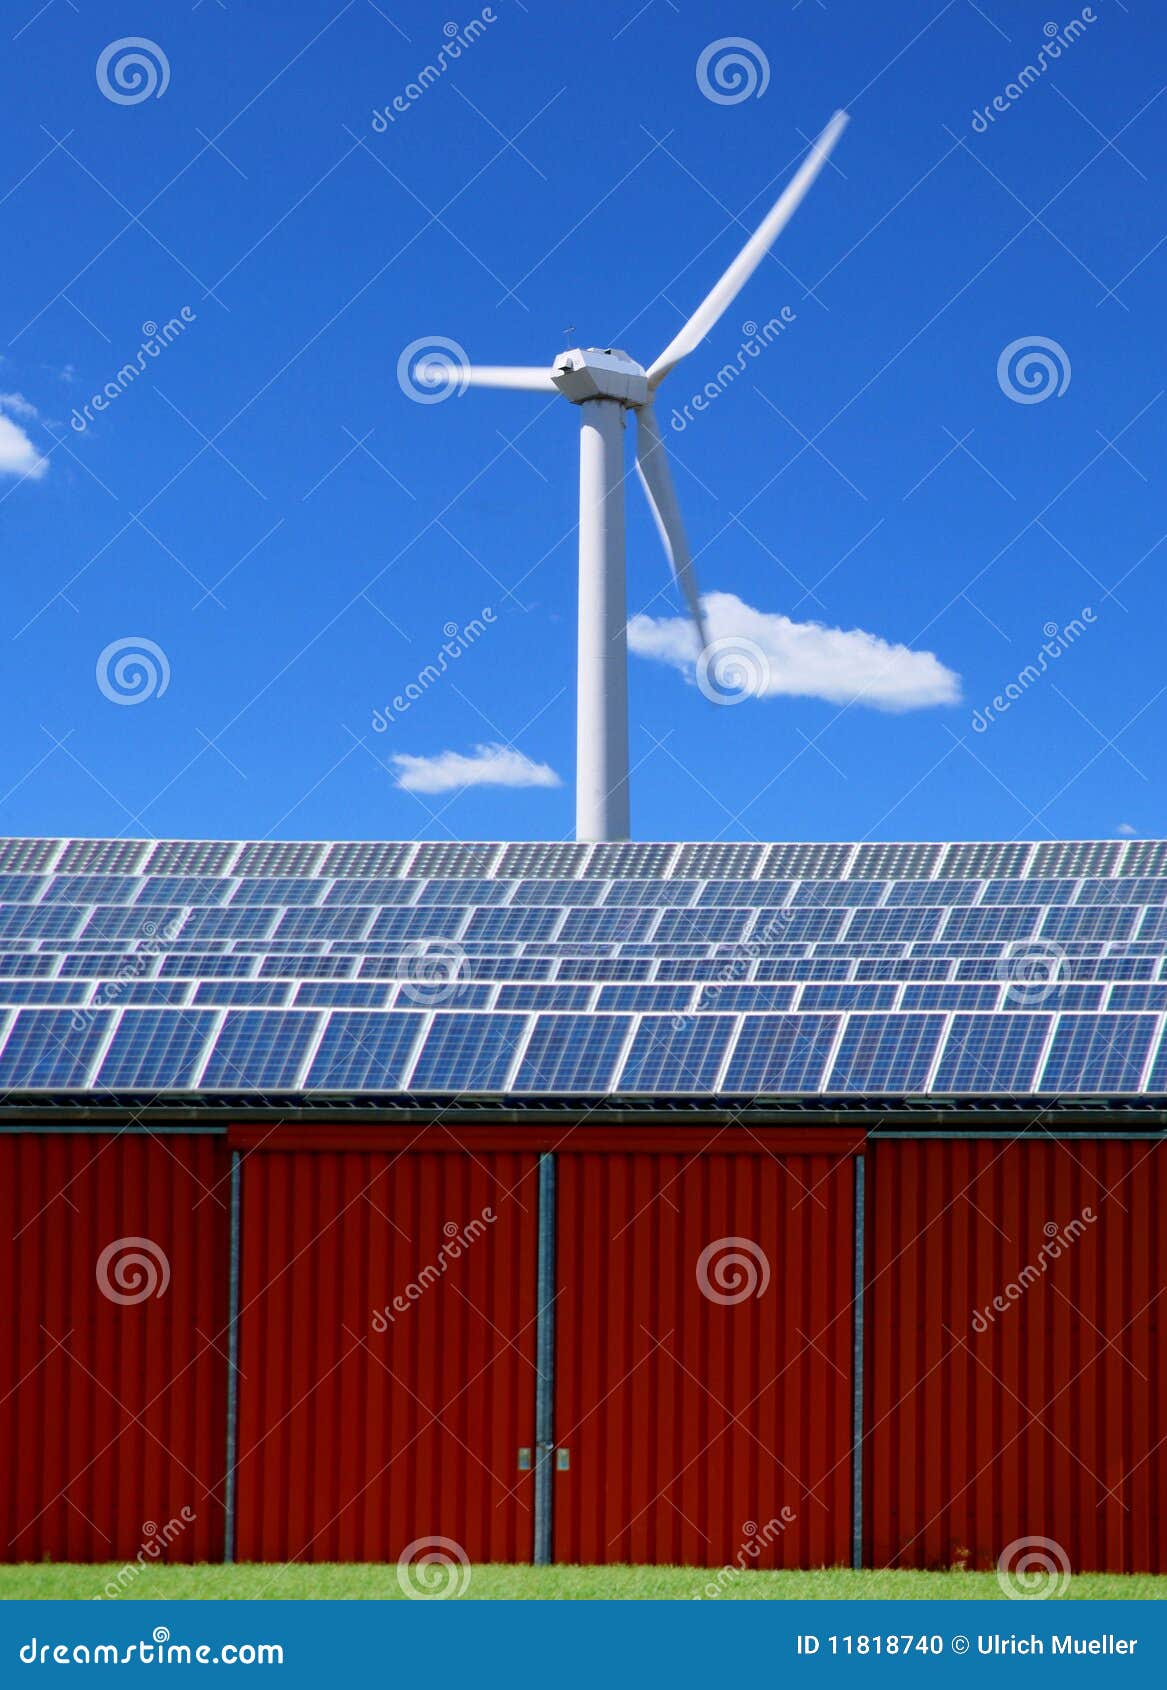 Solar Panel And Wind Energy Stock Photo Image of recycling, sustainable 11818740